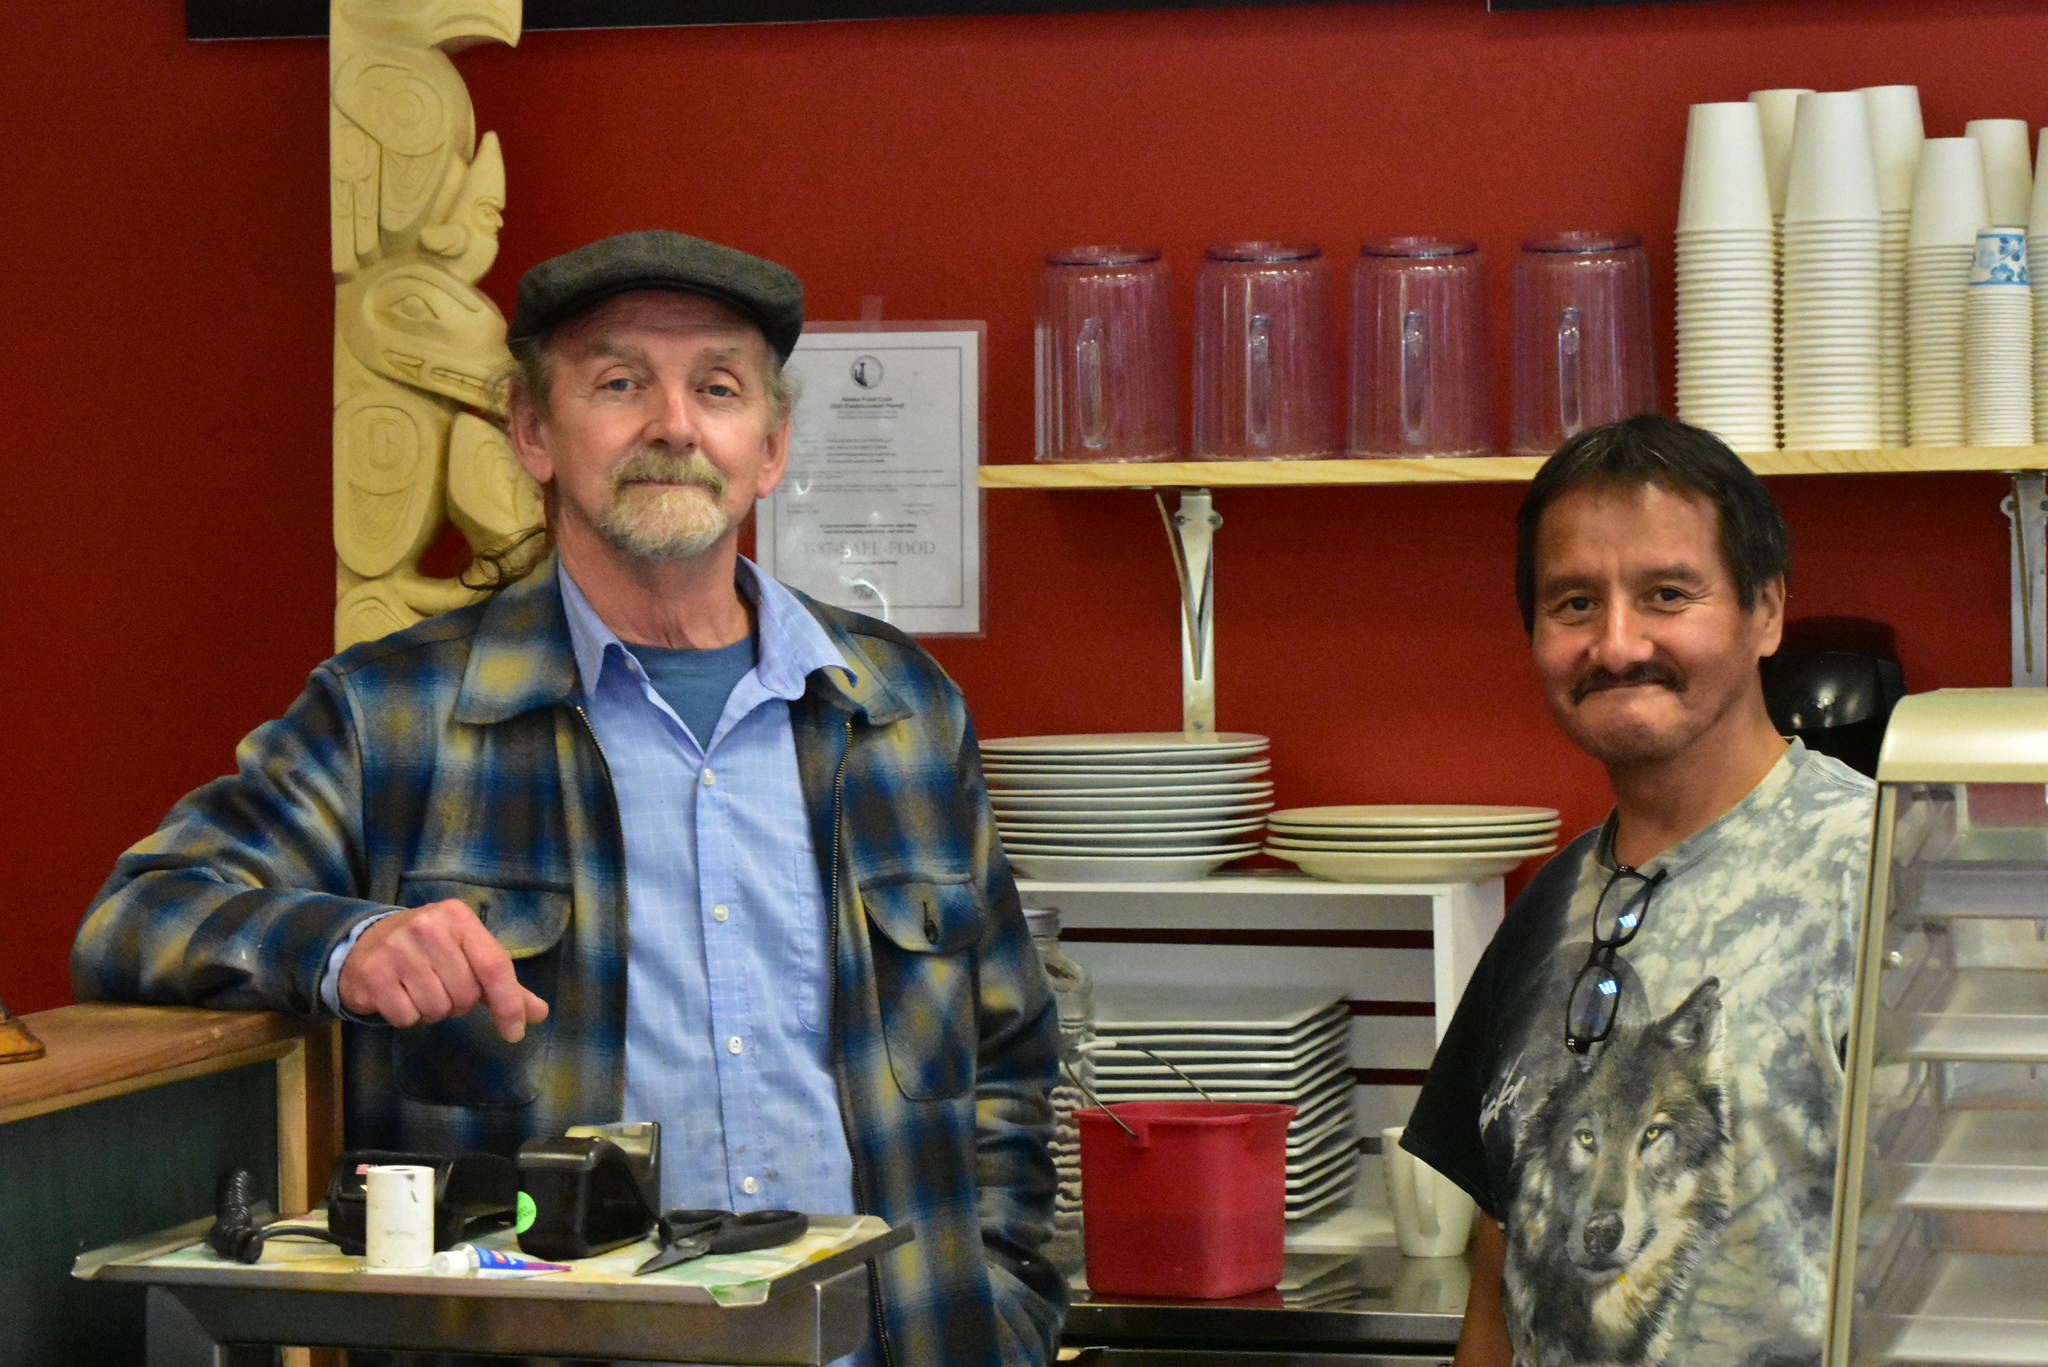 Don Morgan, left and Speedy James are co-owners of a new restaurant in downtown Juneau. They understand they’re taking a gamble opening during a pandemic, but Morgan said he hopes he can make it work. Monday, June 27, 2020. (Peter Segall | Juneau Empire)